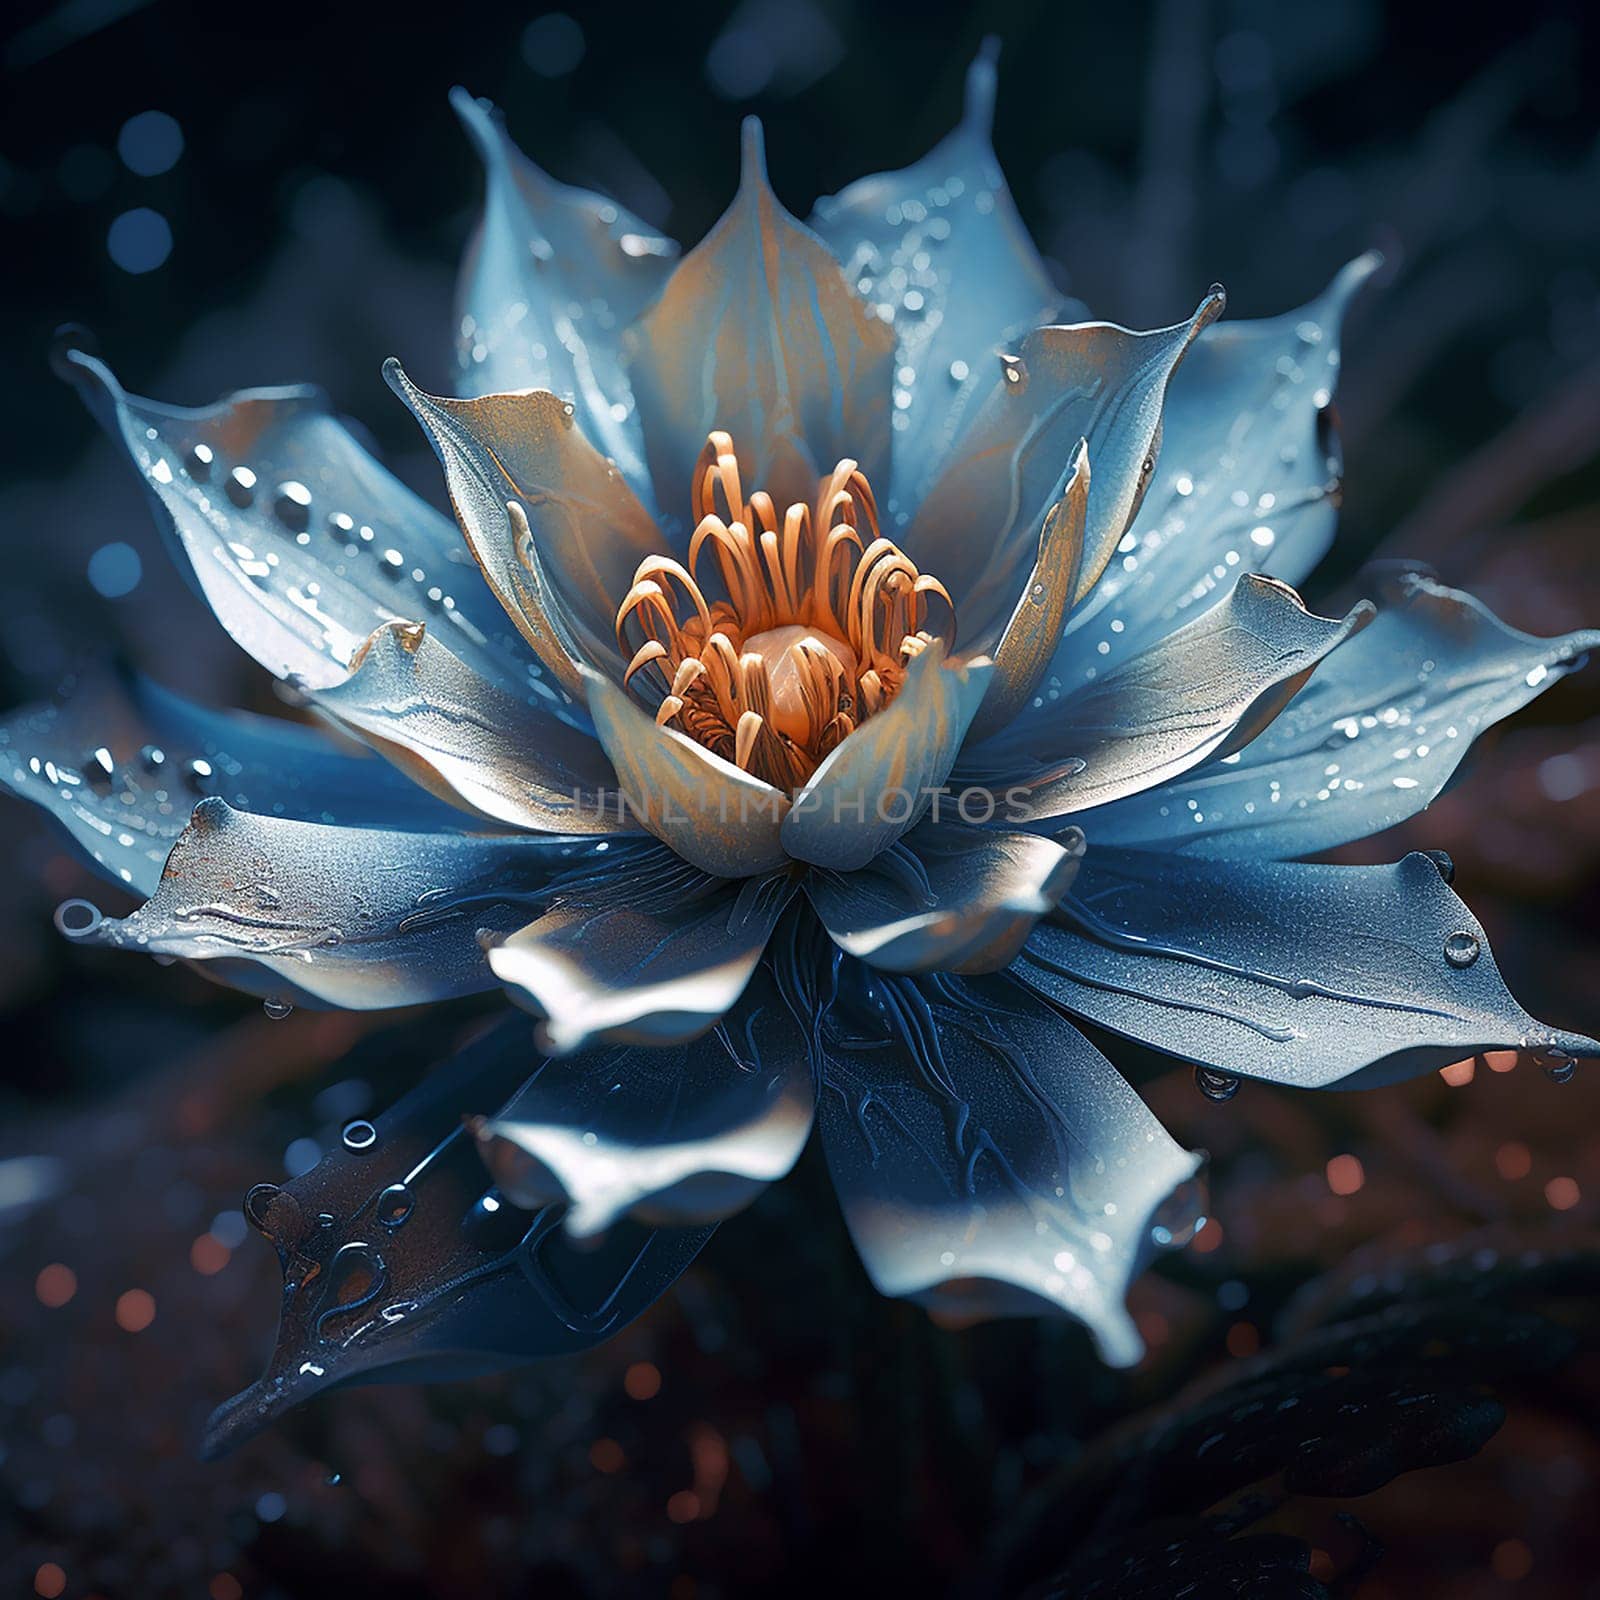 A close up of a blue flower with dew drops. by Hype2art